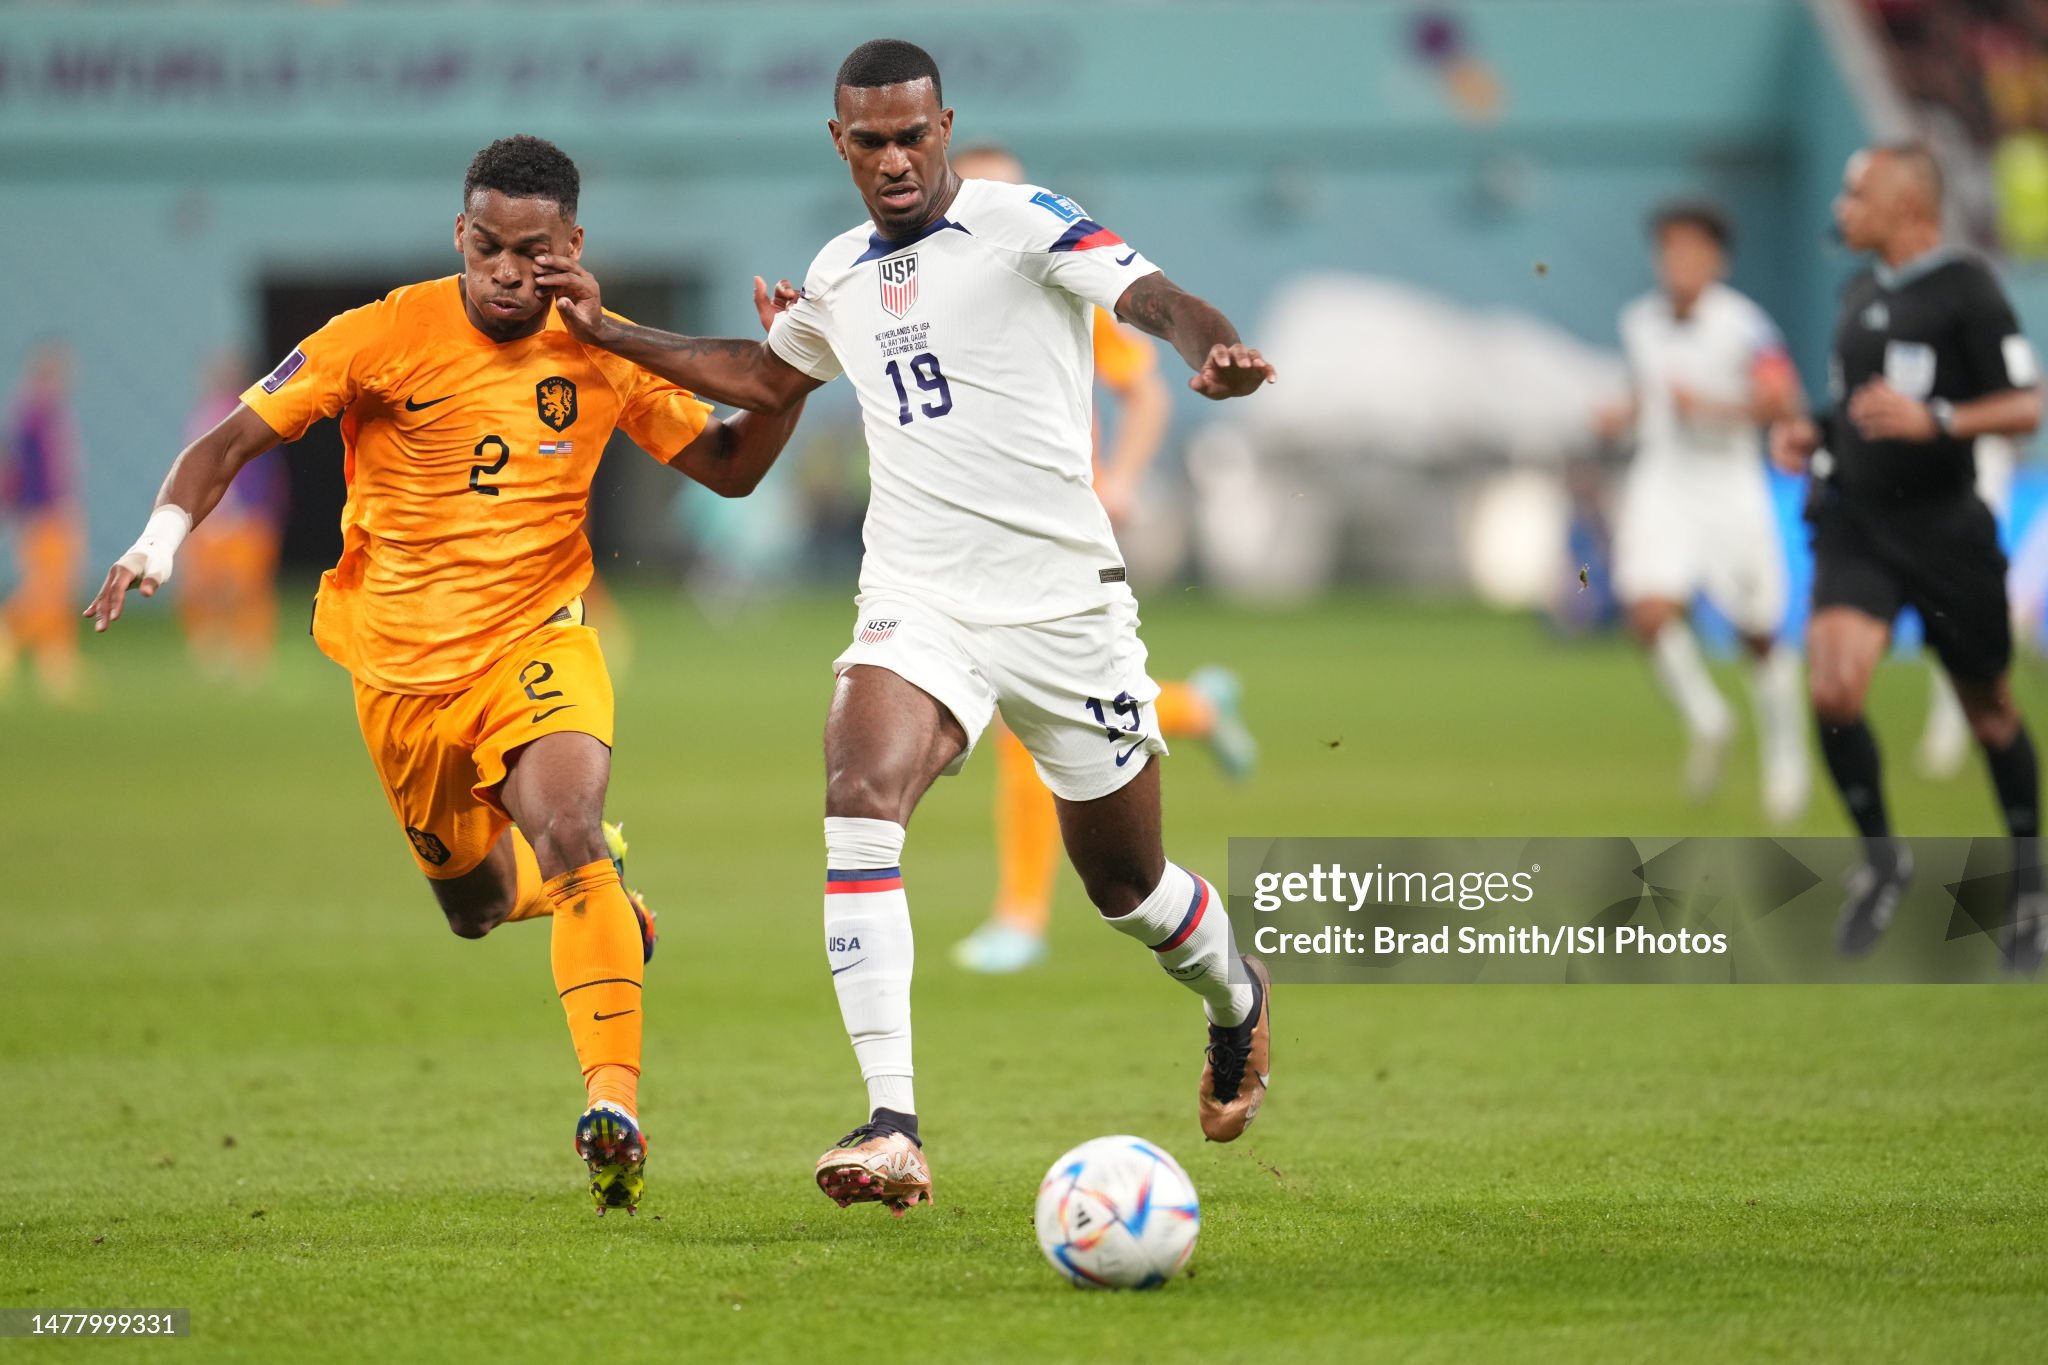 USMNT striker Haji Wright close to moving to Coventry City